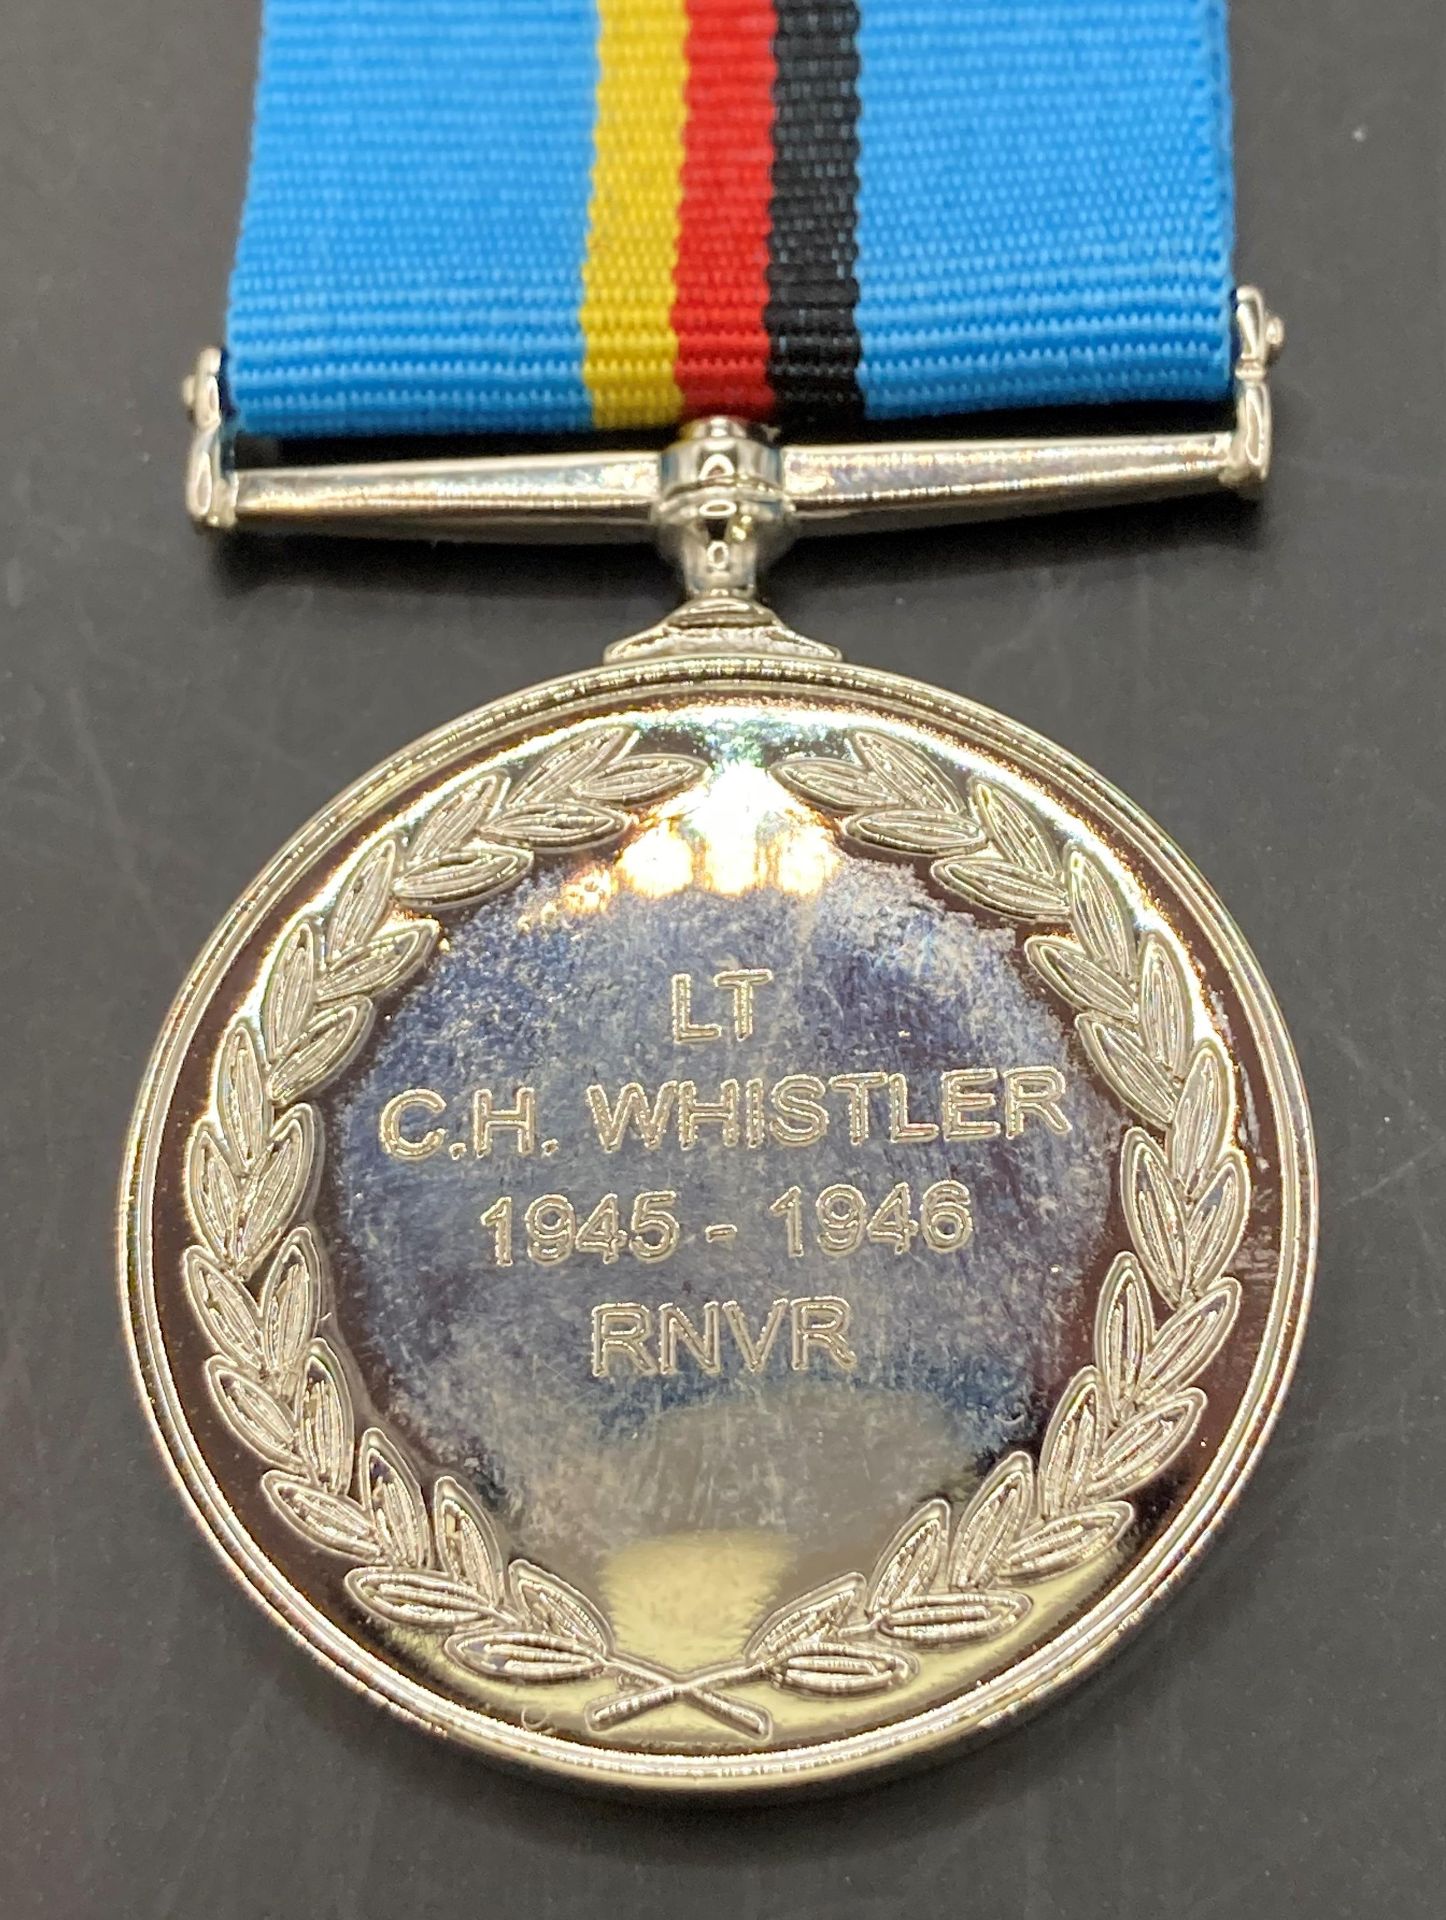 British Forces Germany Medal named to LT C.H. WHISTLER 1945-1946 RNVR in box of issue. - Image 3 of 3